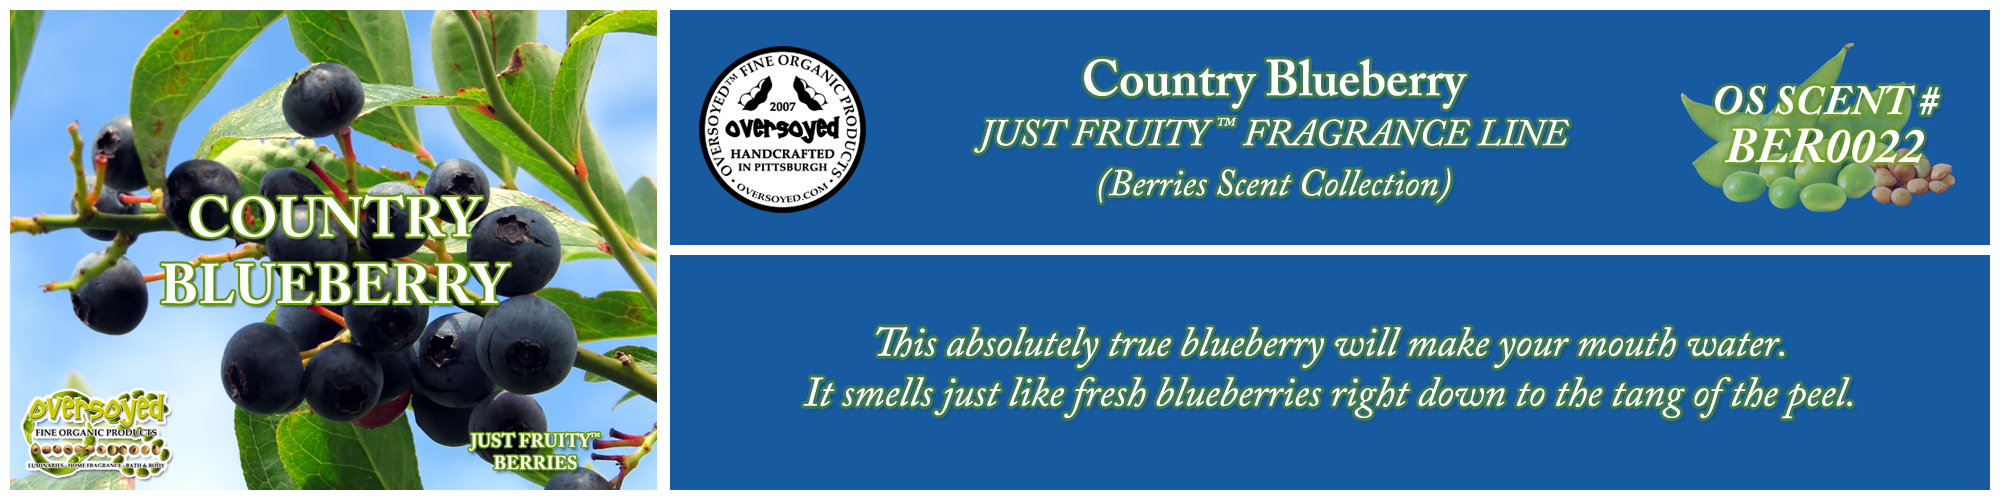 Country Blueberry Handcrafted Products Collection